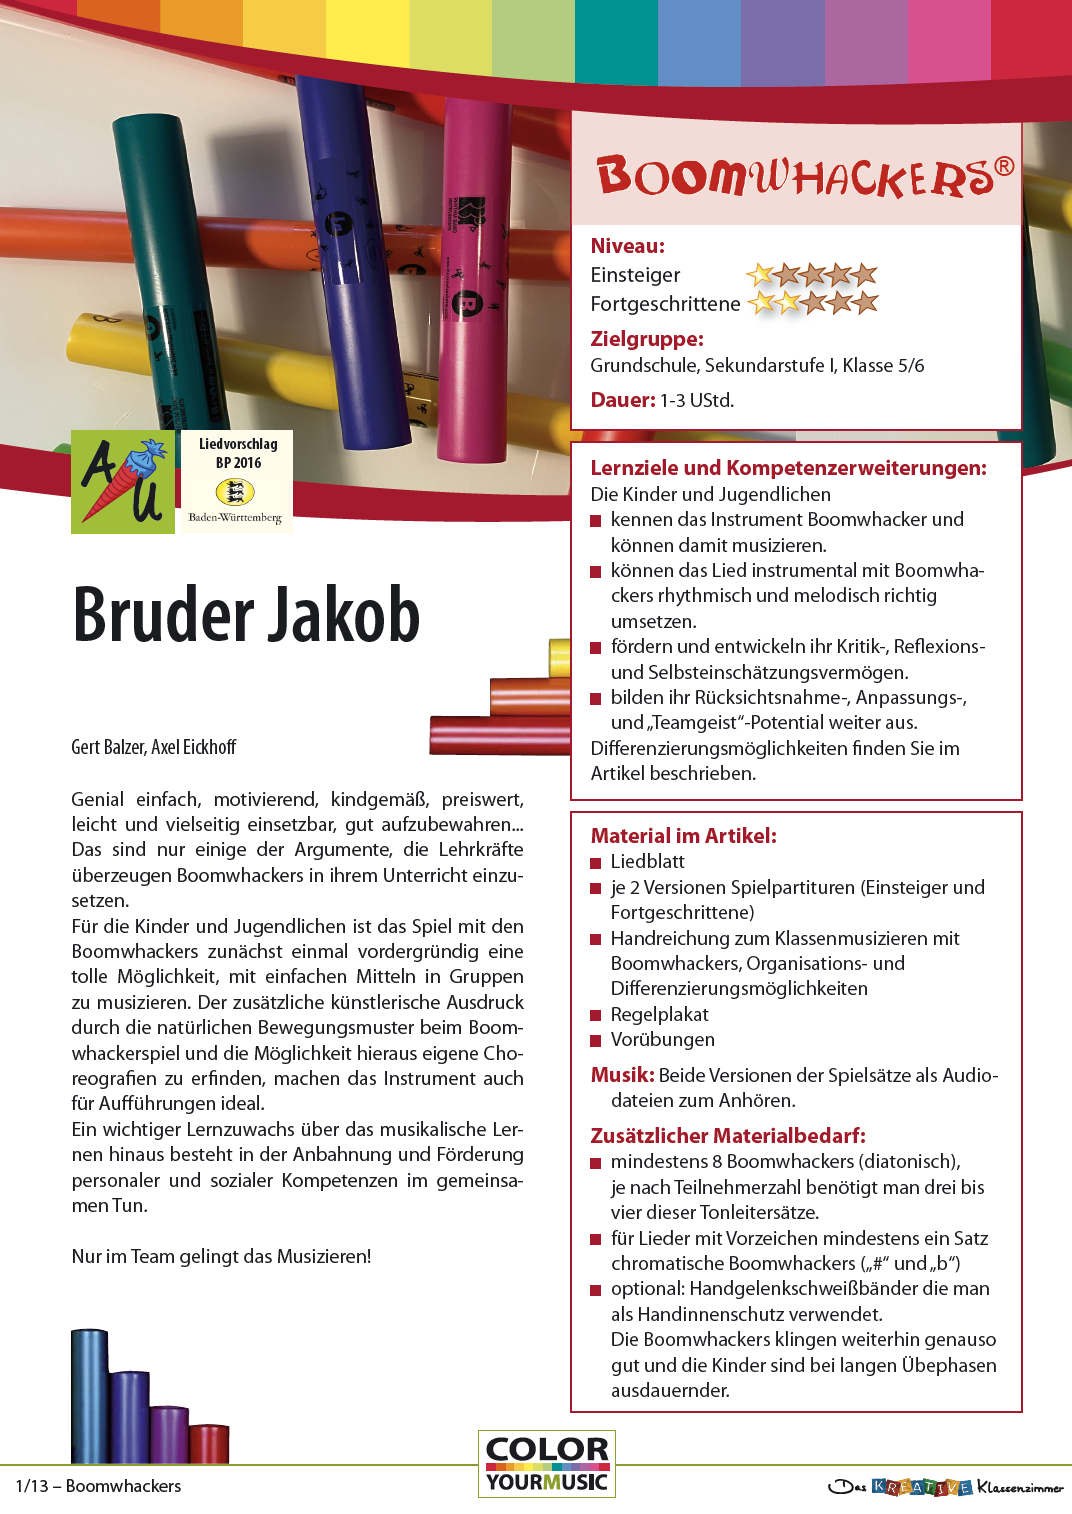 Bruder Jakob - Boomwhackers